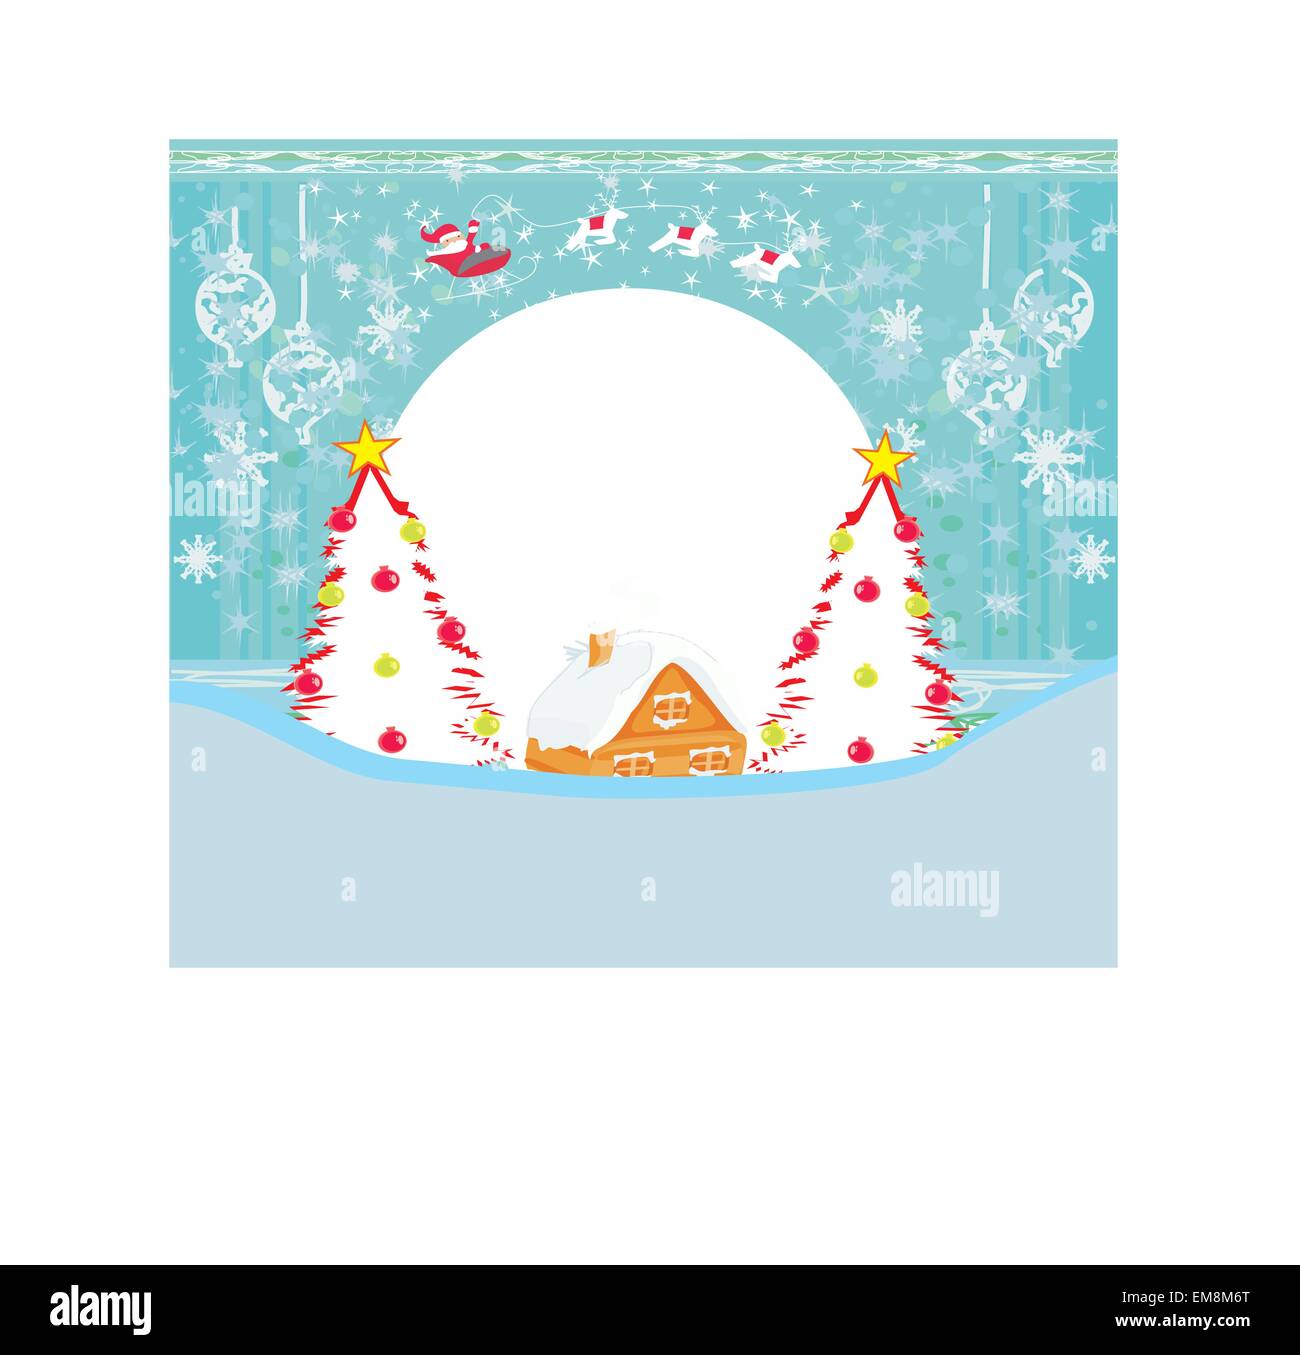 Winter landscape with reindeer, house and Santa Stock Vector